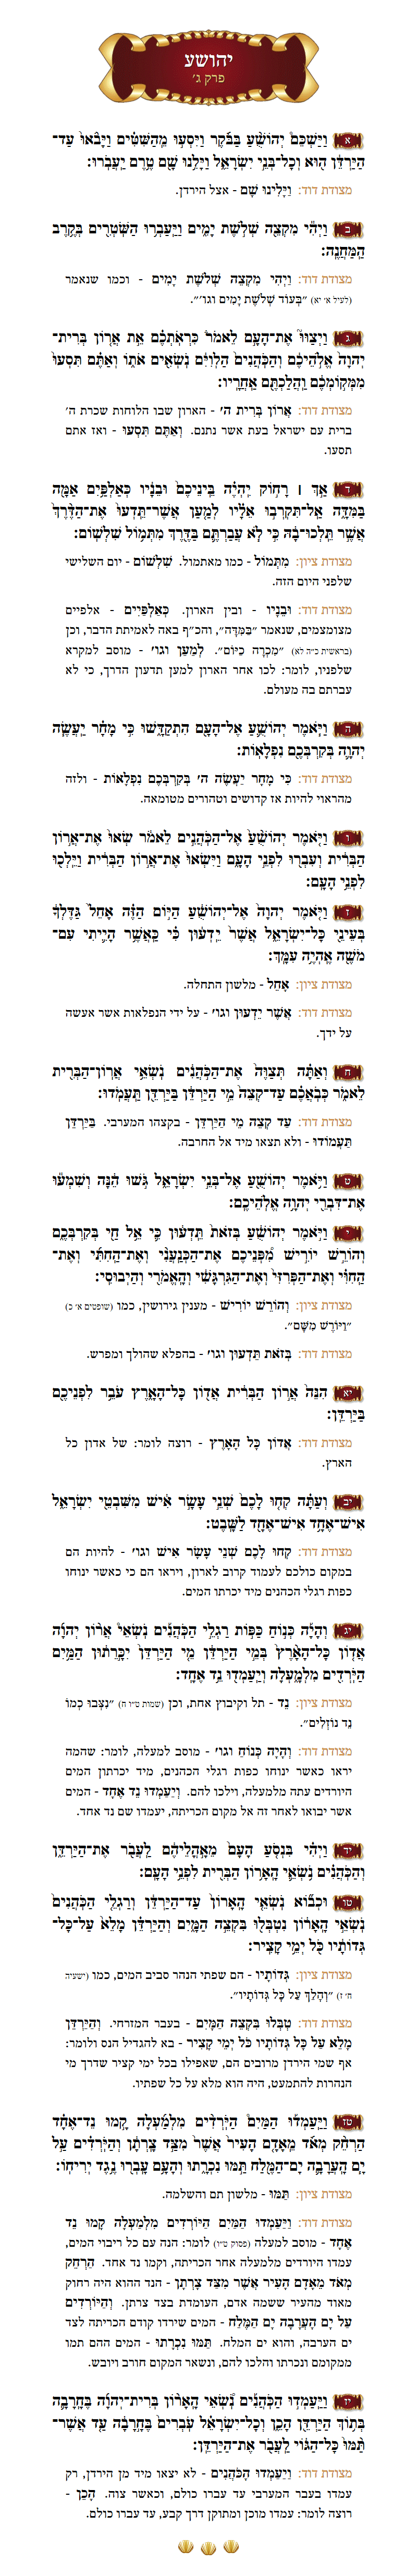 Sefer Yehoshua Chapter 3 with commentary